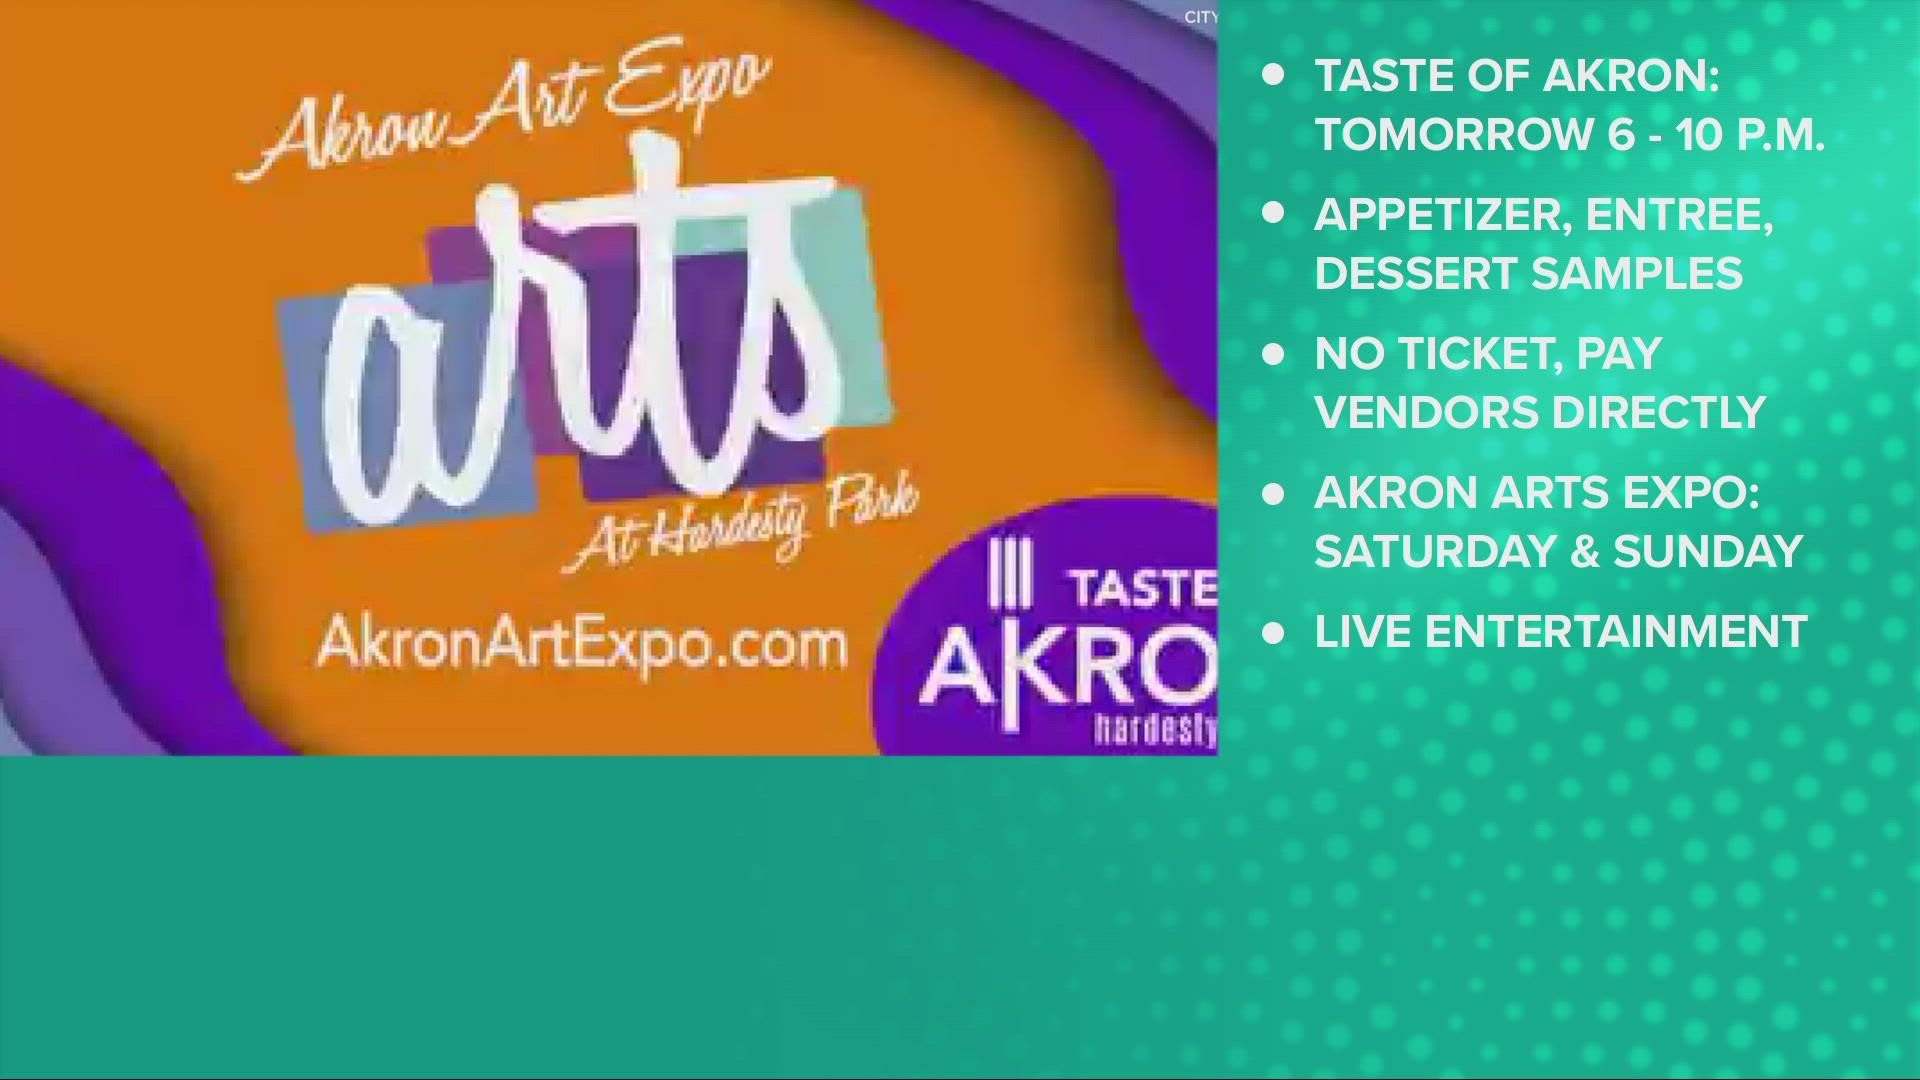 The Taste of Akron will take place on July 21 at 6 p.m., while the weekend-long Akron Arts Expo runs July 23 and 24.